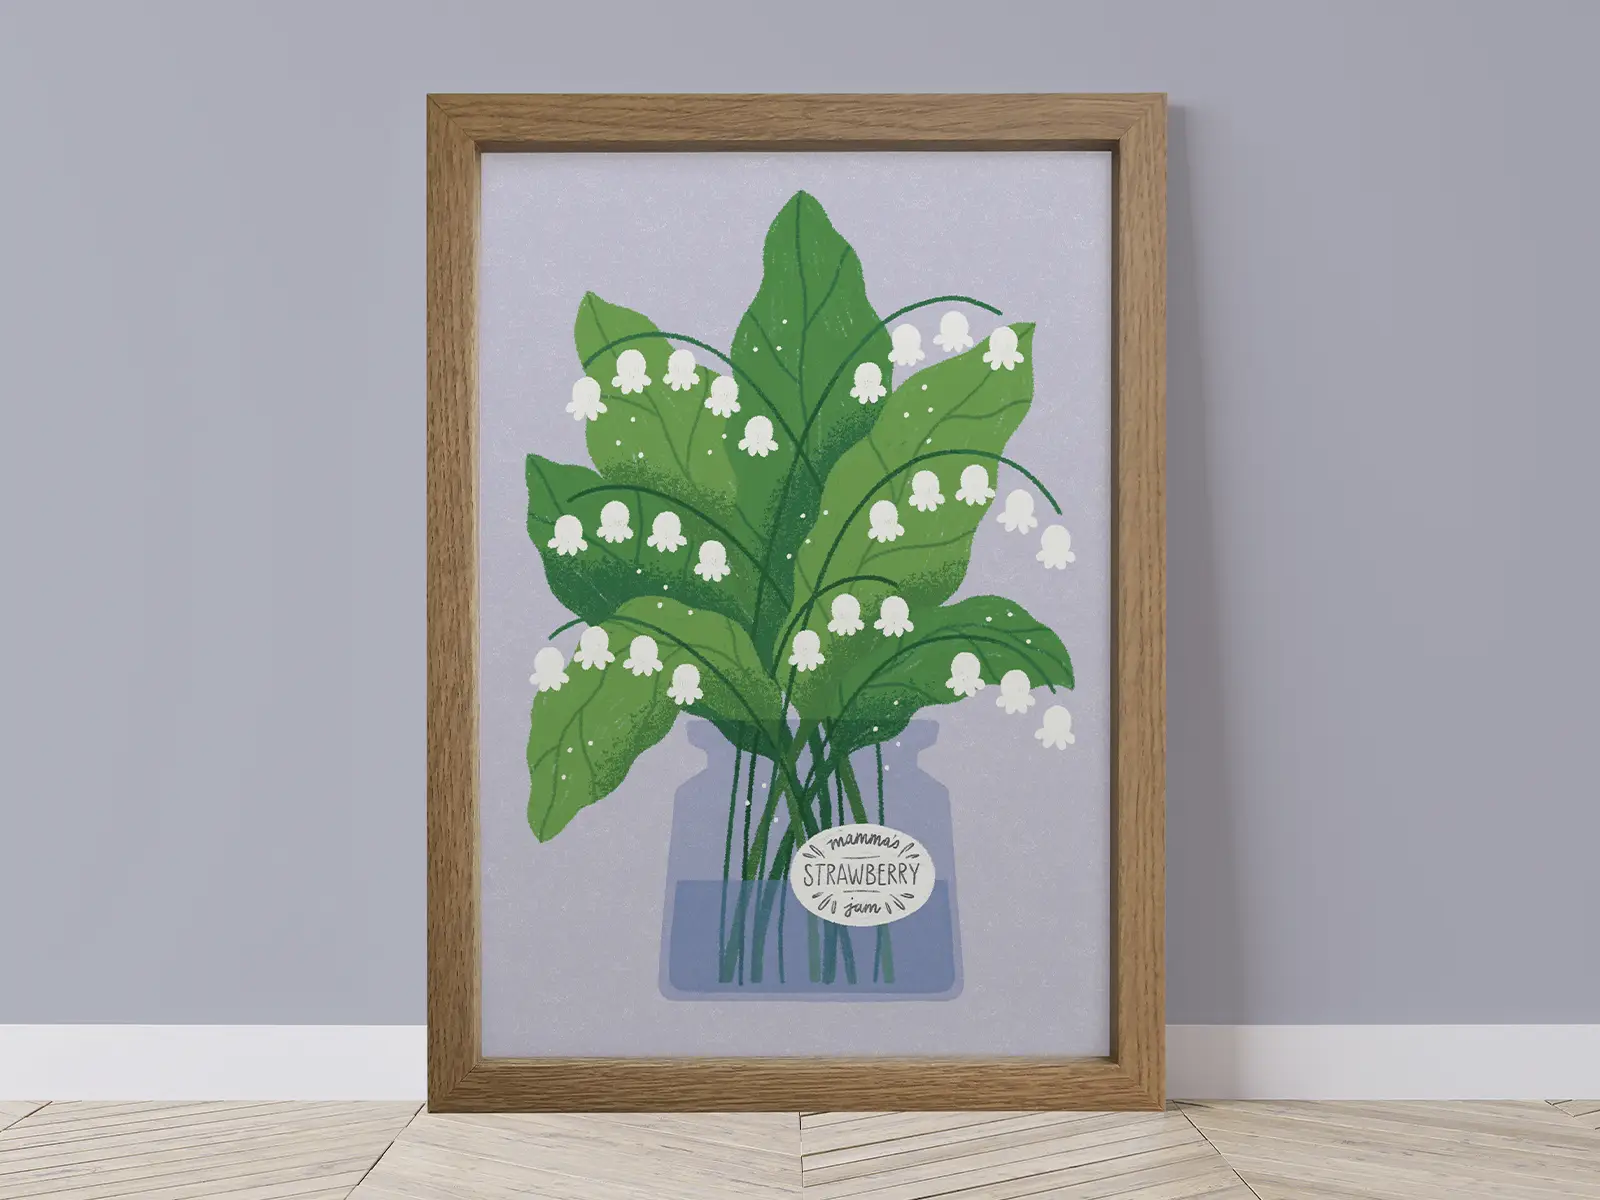 Framed art print featured an illustration of Lily of the Valley in a jam jar.